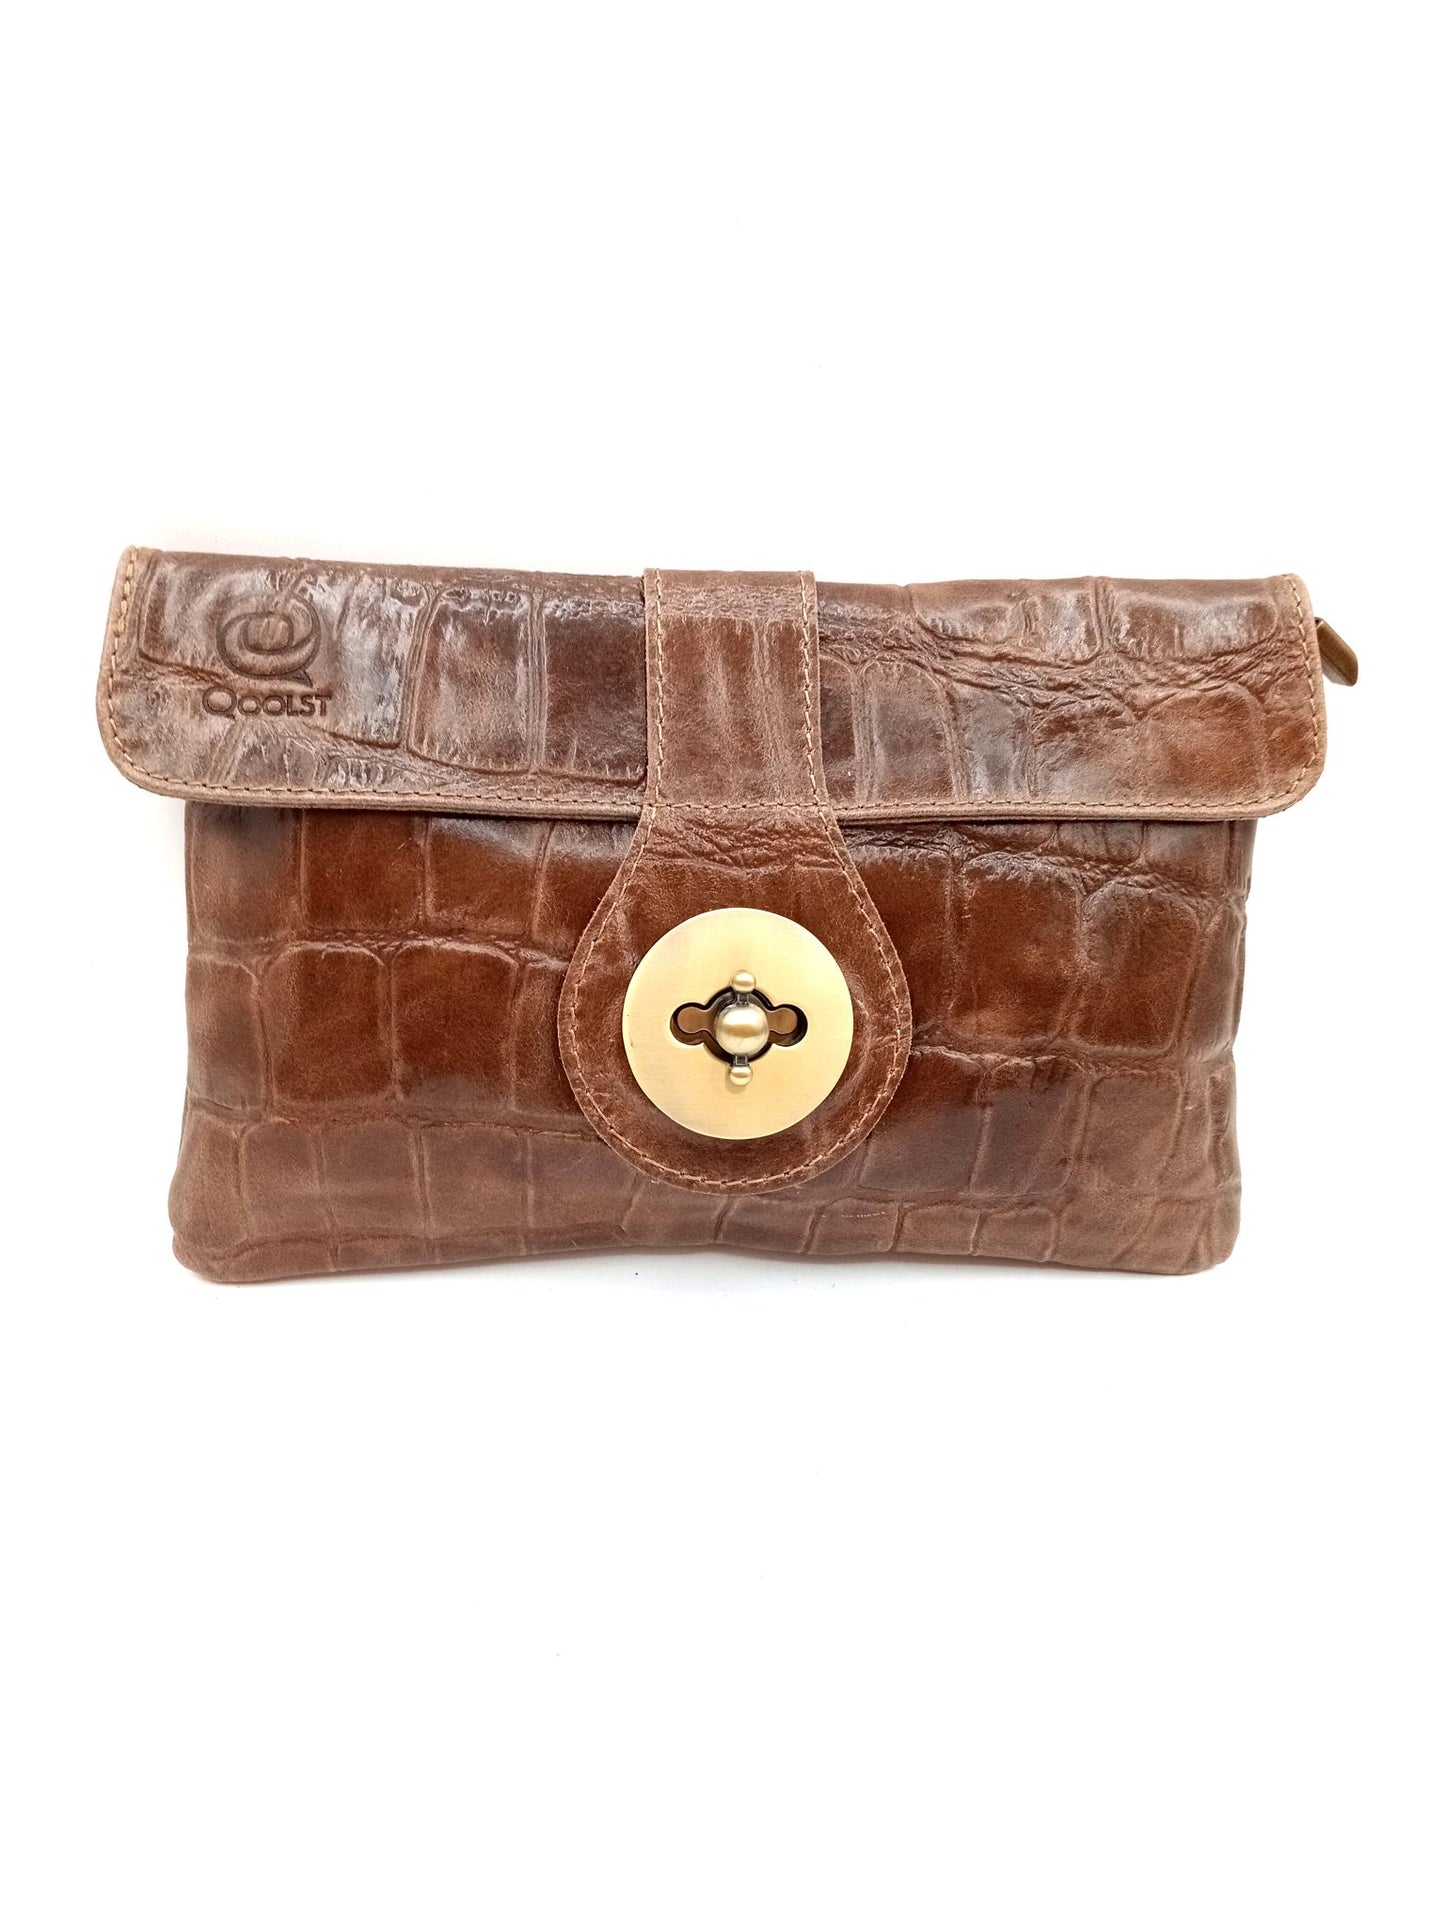 Women's leather wallet bag with Qoolst crocodile engraved metal clasp